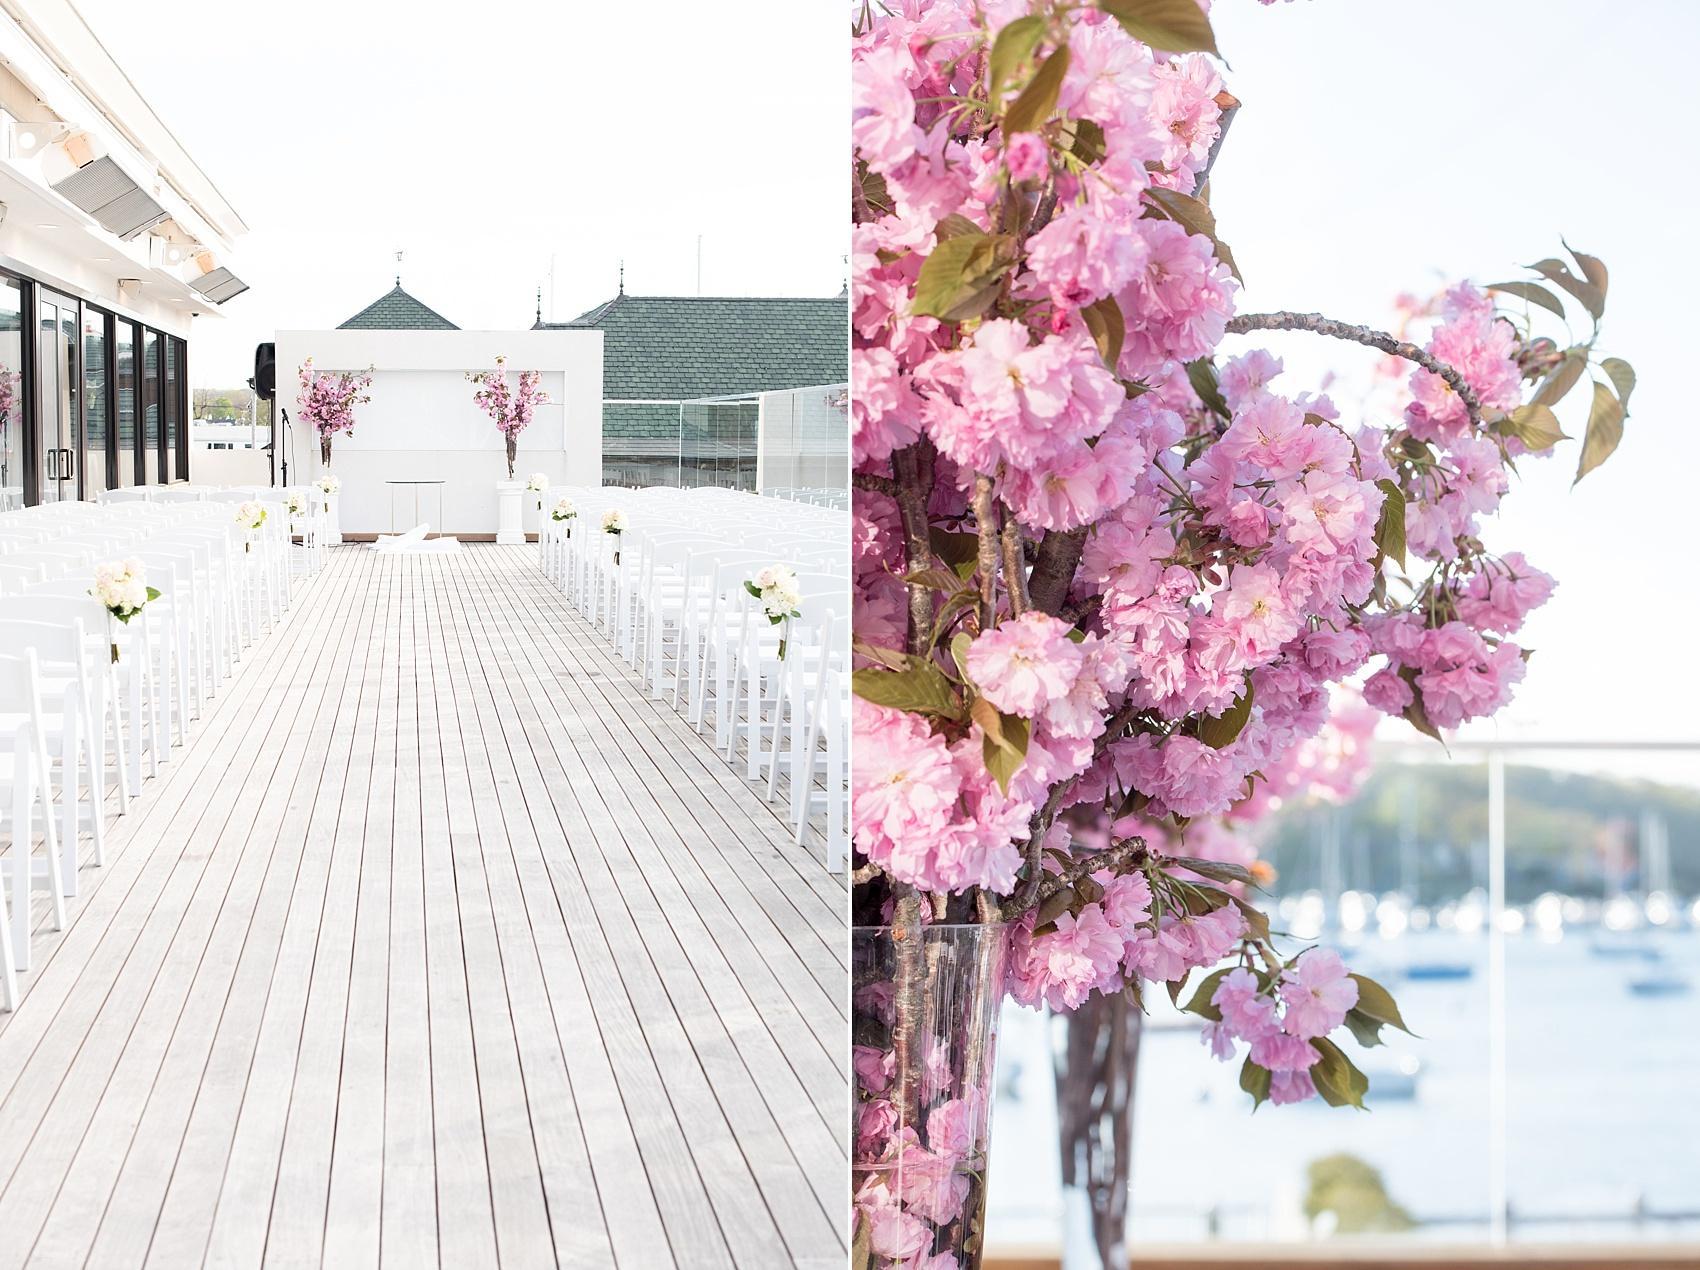 Photos by Mikkel Paige Photography for a wedding at Harbor Club on Long Island. Waterfront outdoor ceremony with cherry blossom details.